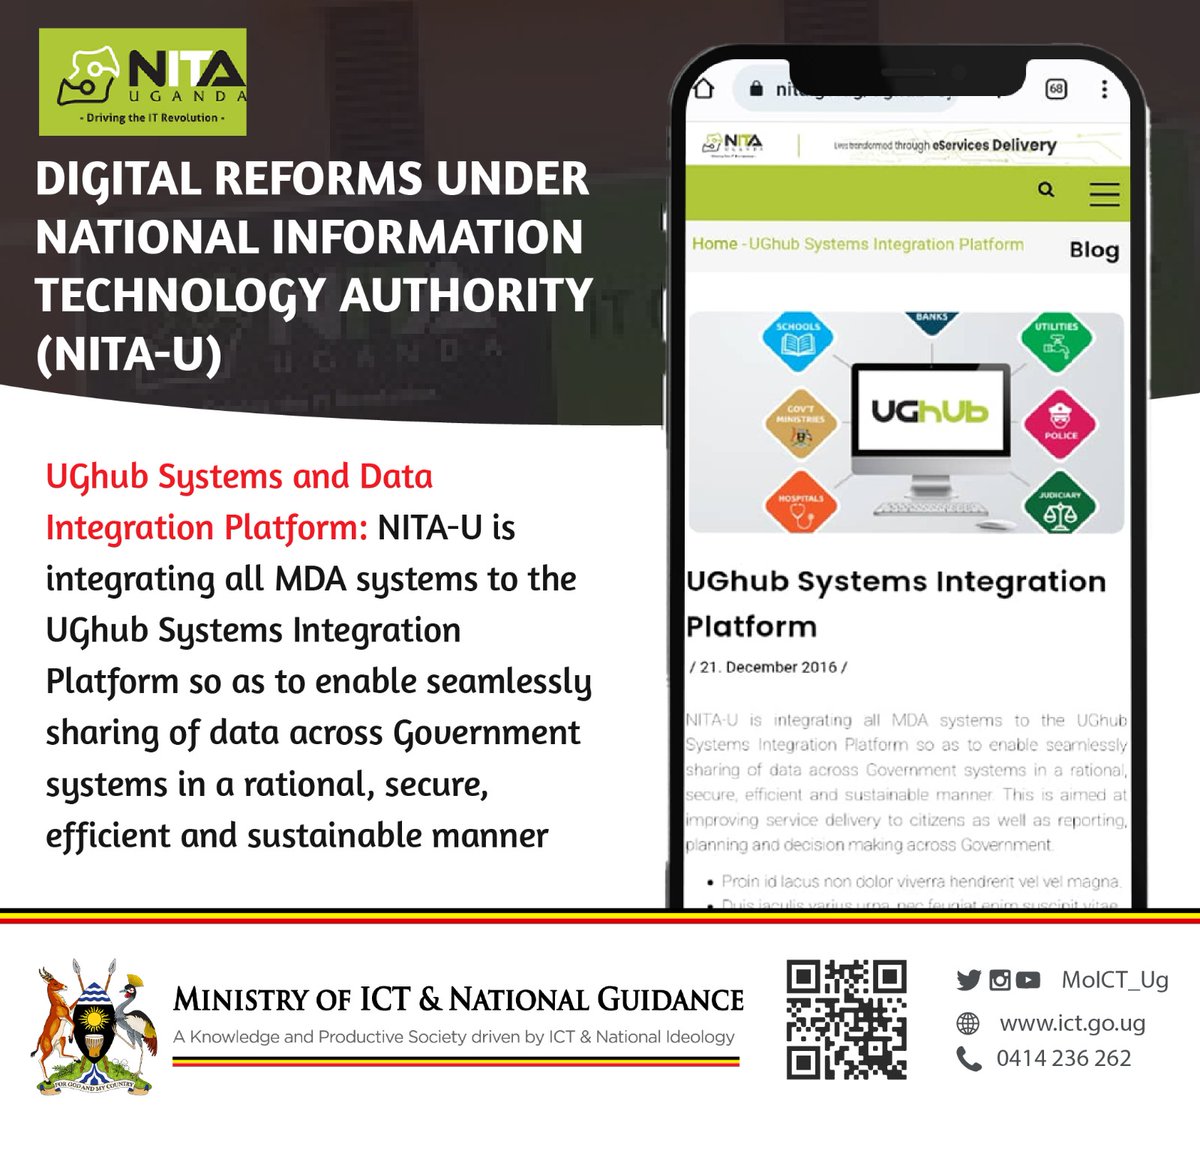 UGhub systems provide services like:
✅API management( A set of protocols to build & integrate application s/w)
✅Identity Access management
✅Semantic &systems catalogue
✅Reporting analytics & IOTs( Evaluating data generated & gathered by IOTs)
#DigitzeUg @MoICT_Ug @NITAUganda1